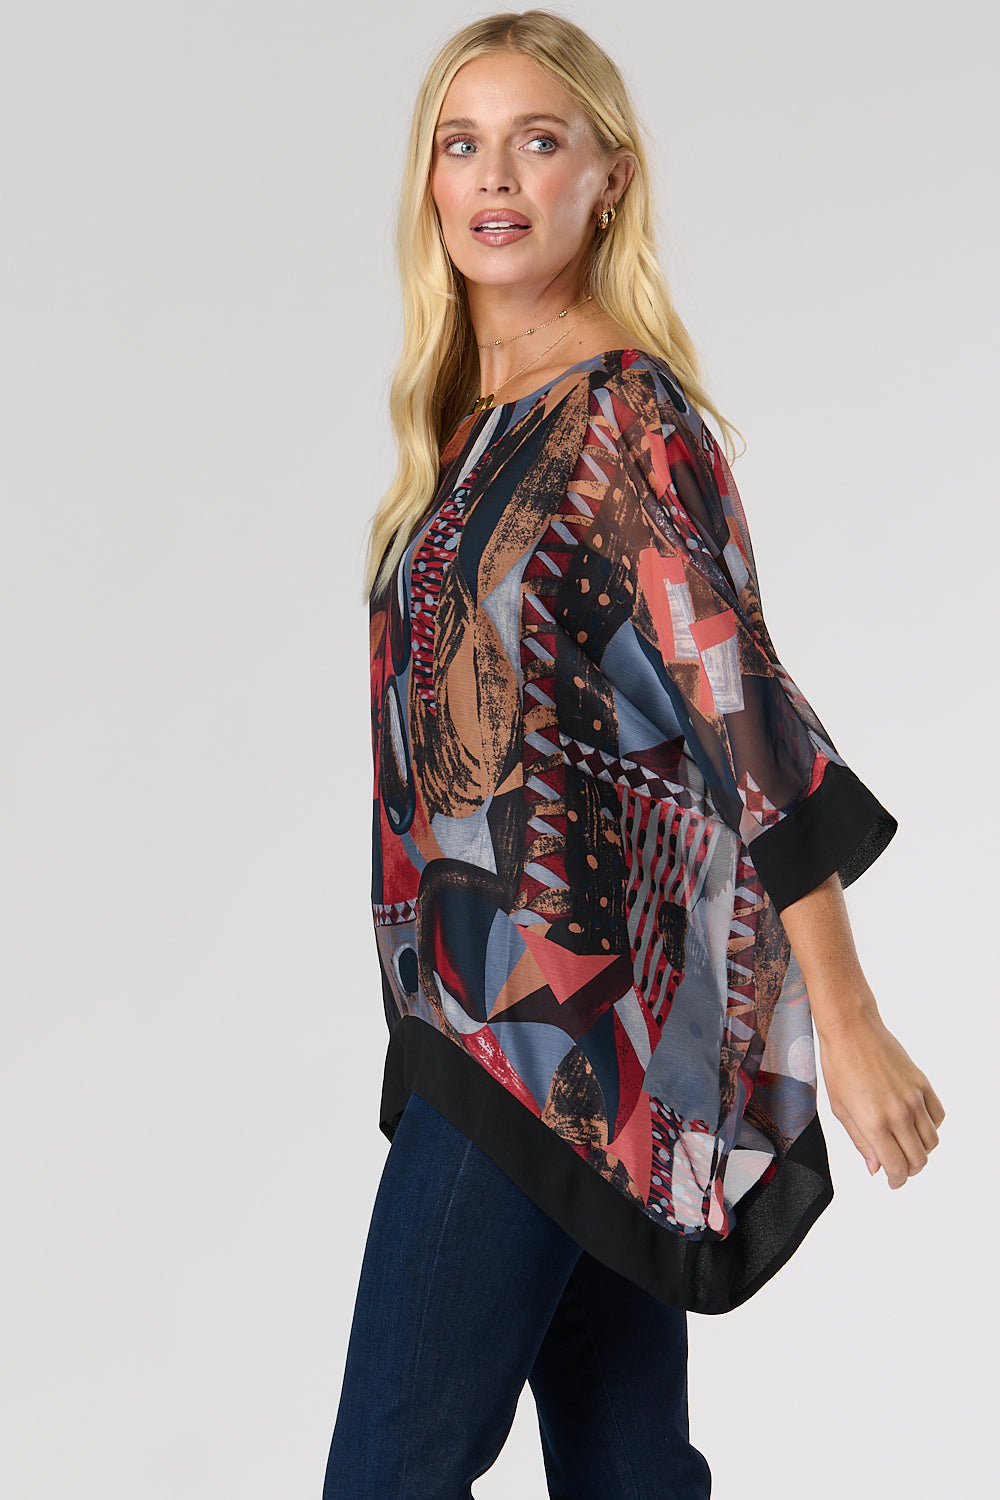 Saloos Plain Trims Layered Top with Necklace